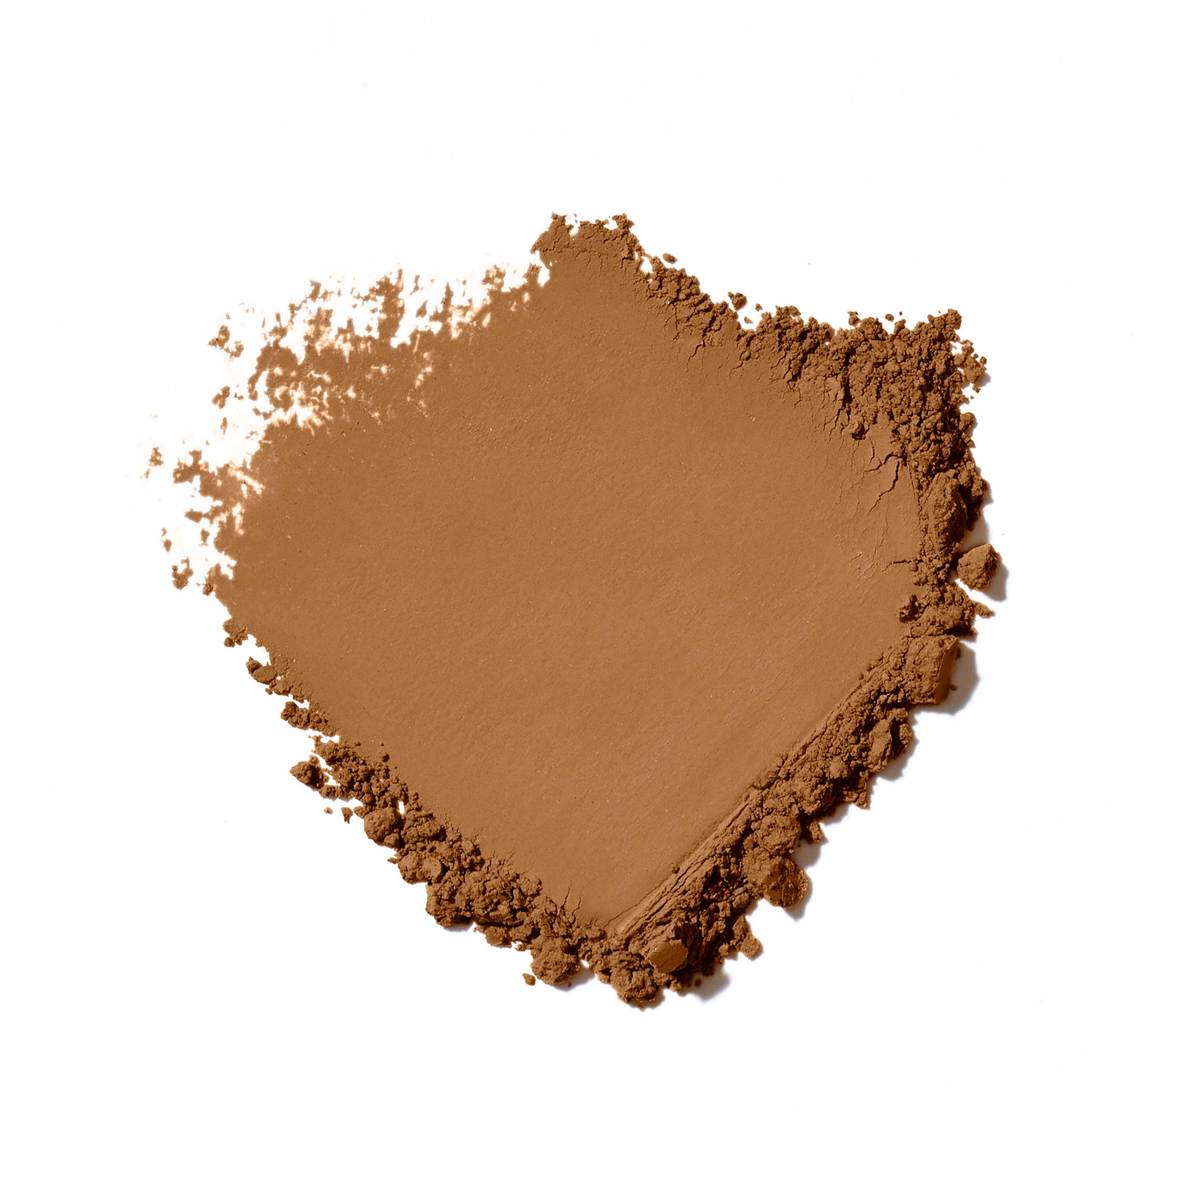 Jane Iredale Amazing Base® Loose Mineral Powder at Socialite Beauty Canada